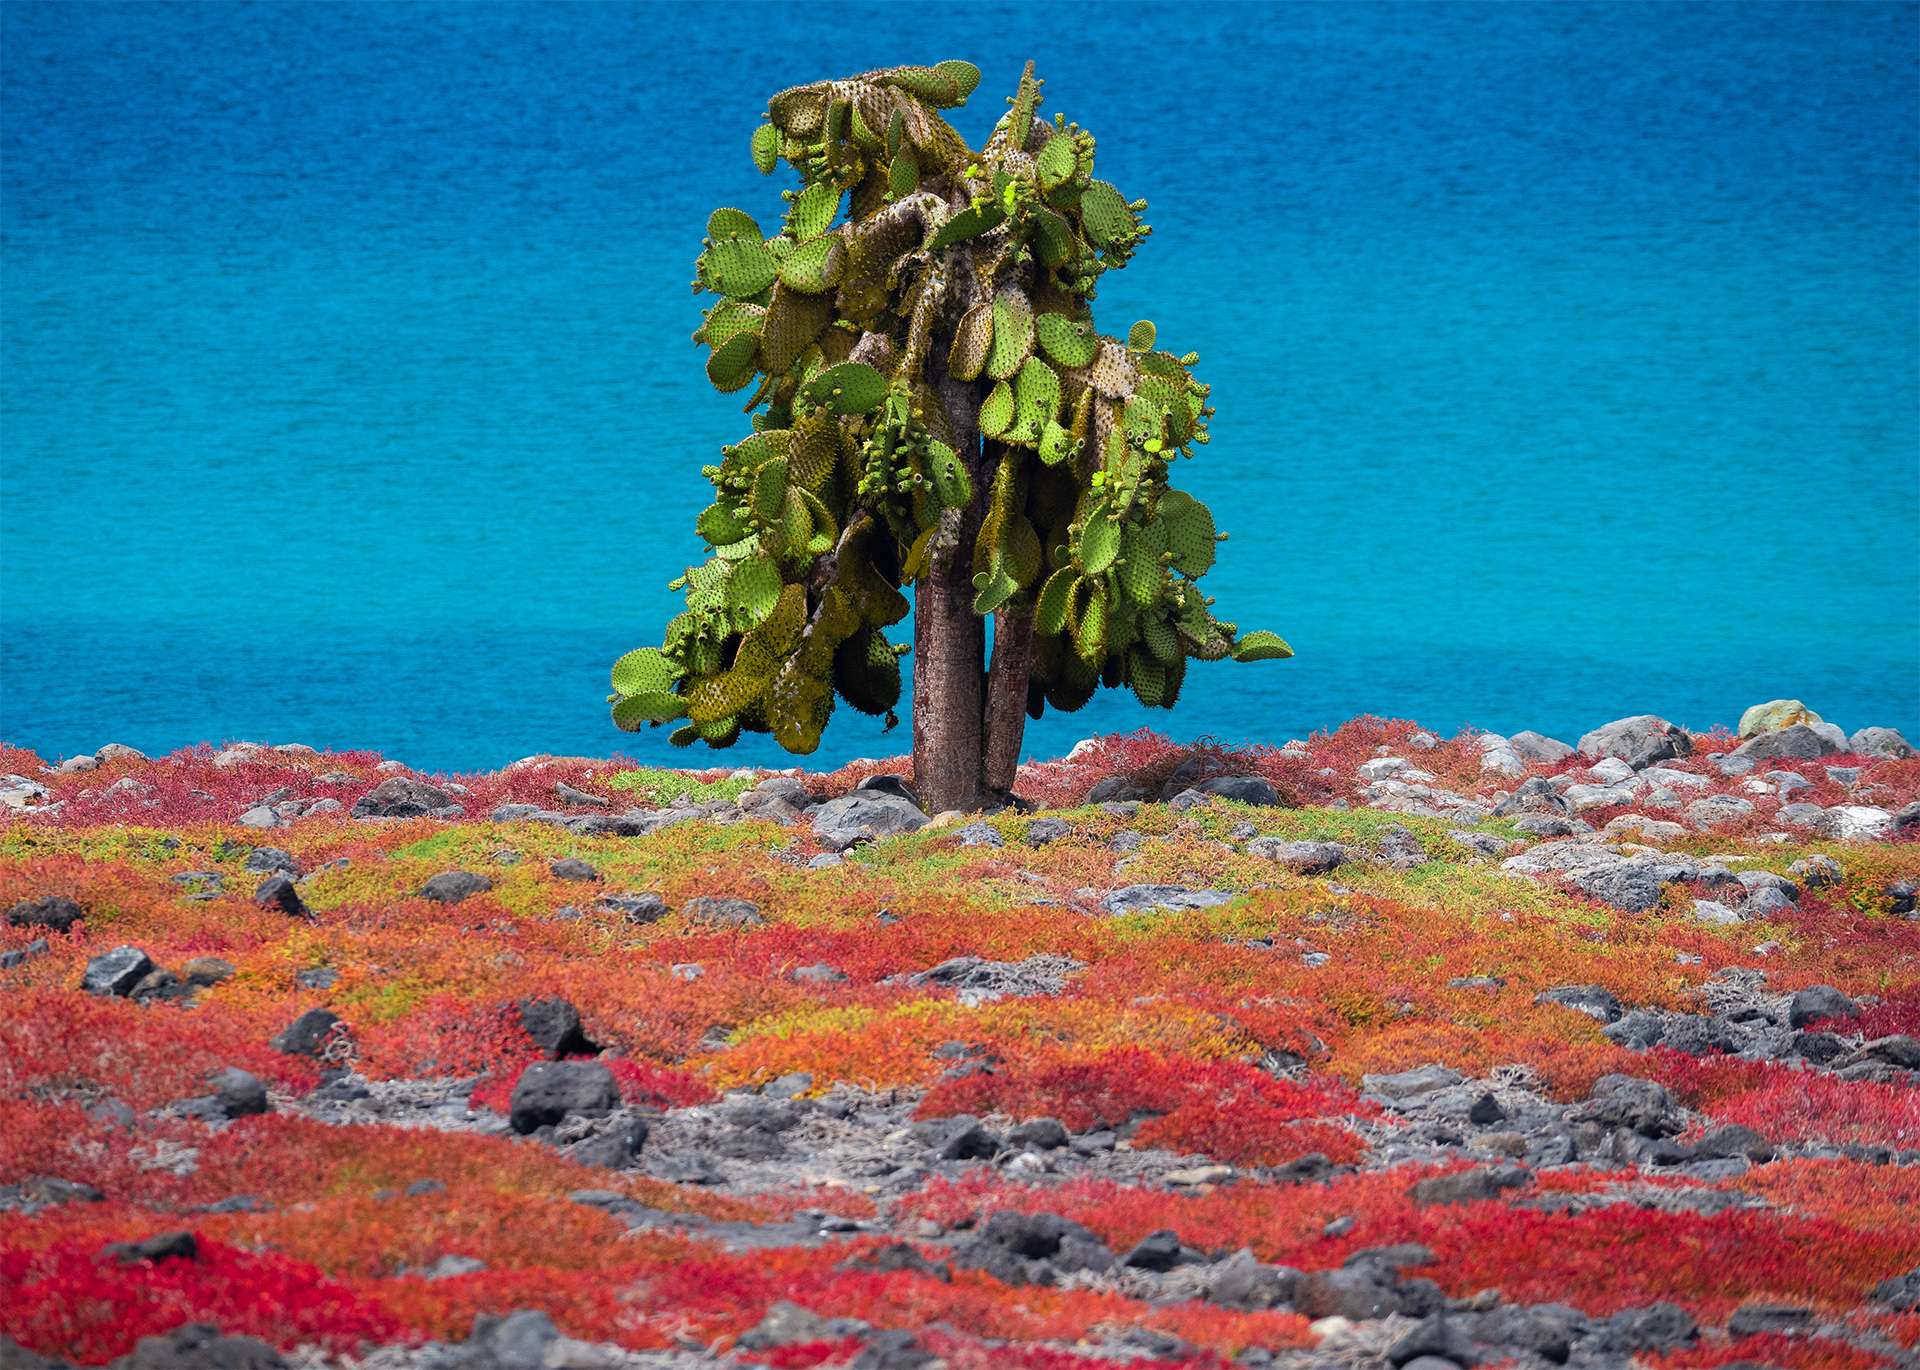 Cactus plant tree species plaza Island Galápagos Islands colorful vibrant landscape ocean and carpet plant species and volcanic rocks